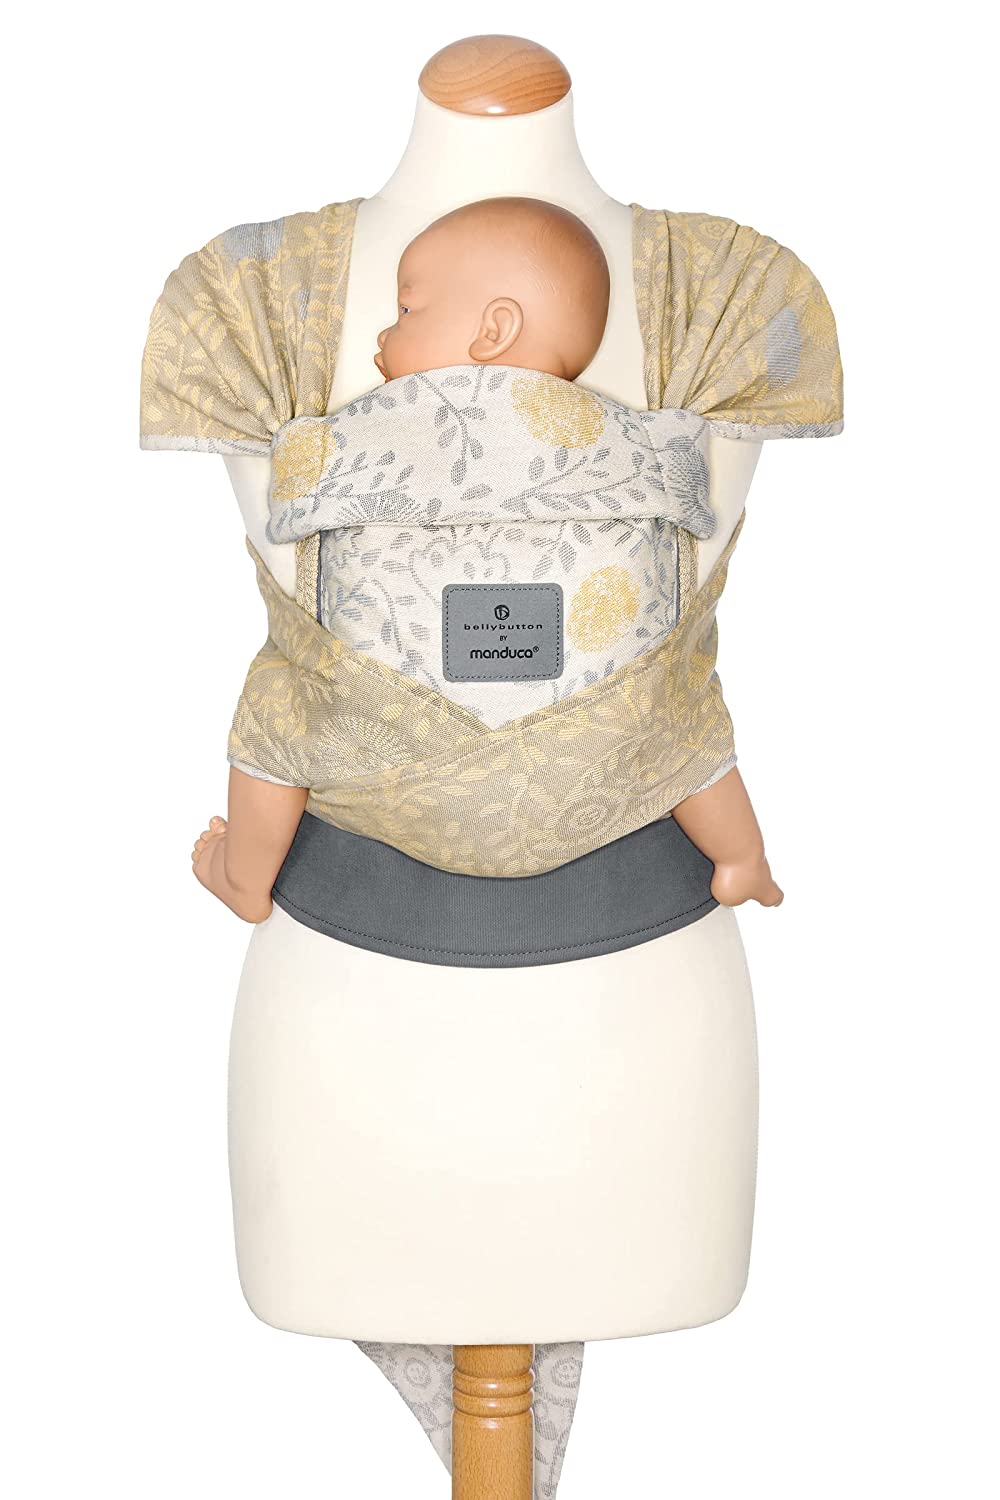 manduca Twist Long Baby Carrier > Bellybutton SoftBlossom < Newborn Carrier Made of Organic Cotton (Jacquard Woven), Soft Belly Belt with Buckle, Fan and Tie Straps (Extra Long Straps)